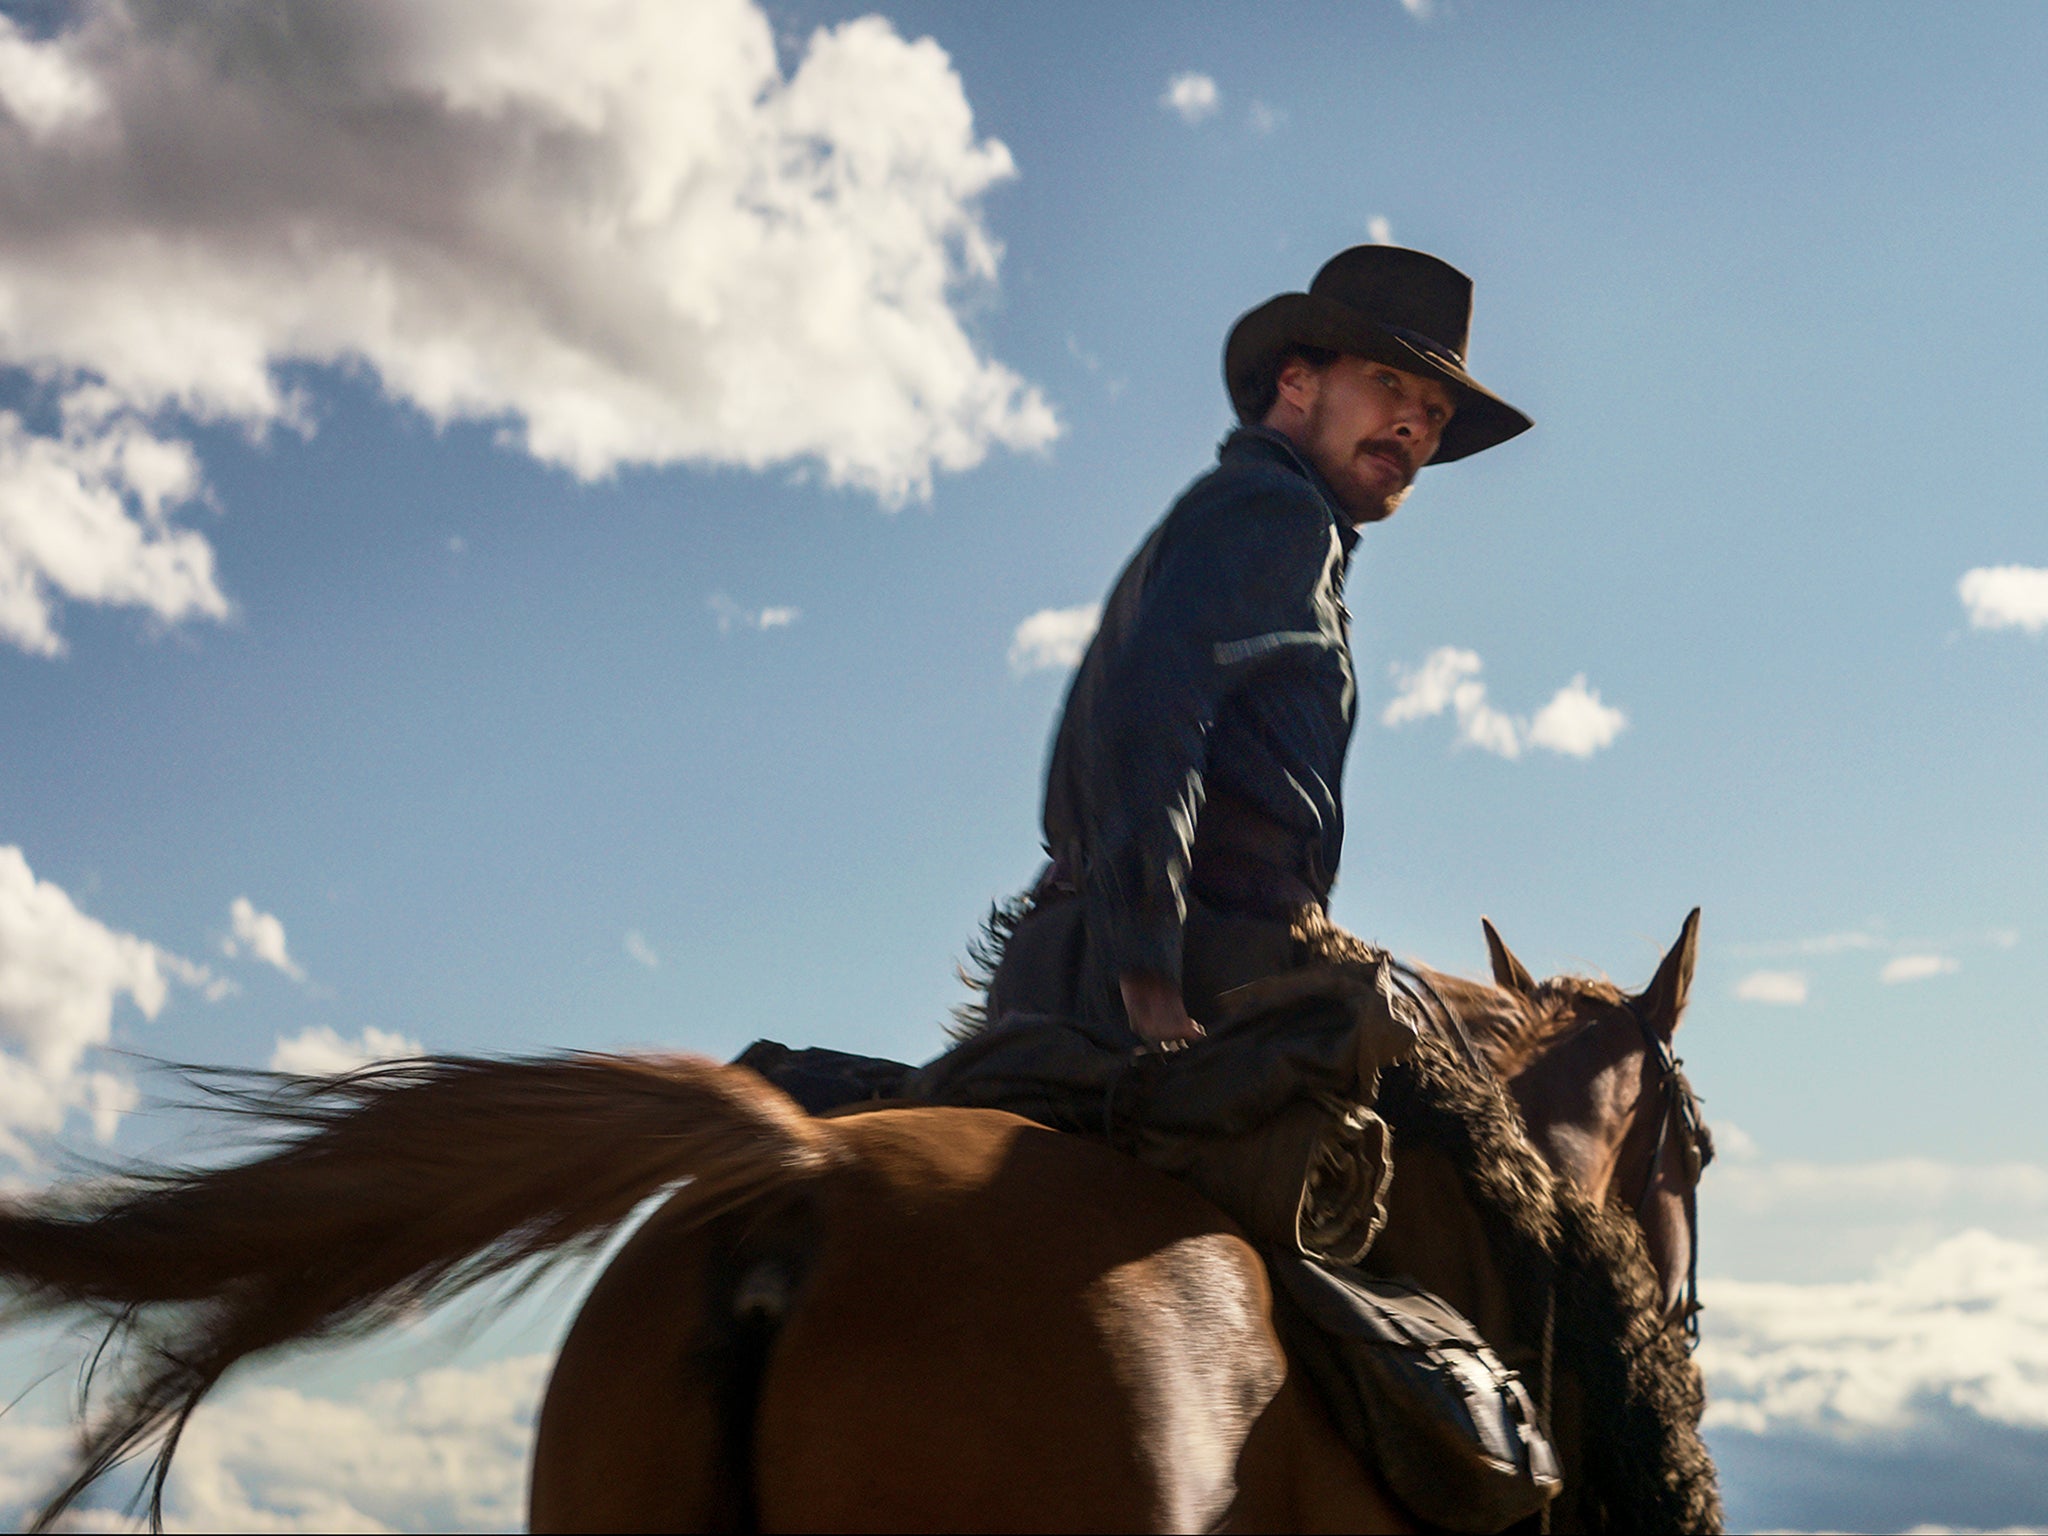 Home on the range: Benedict Cumberbatch as Phil Burbank in ‘The Power of the Dog'